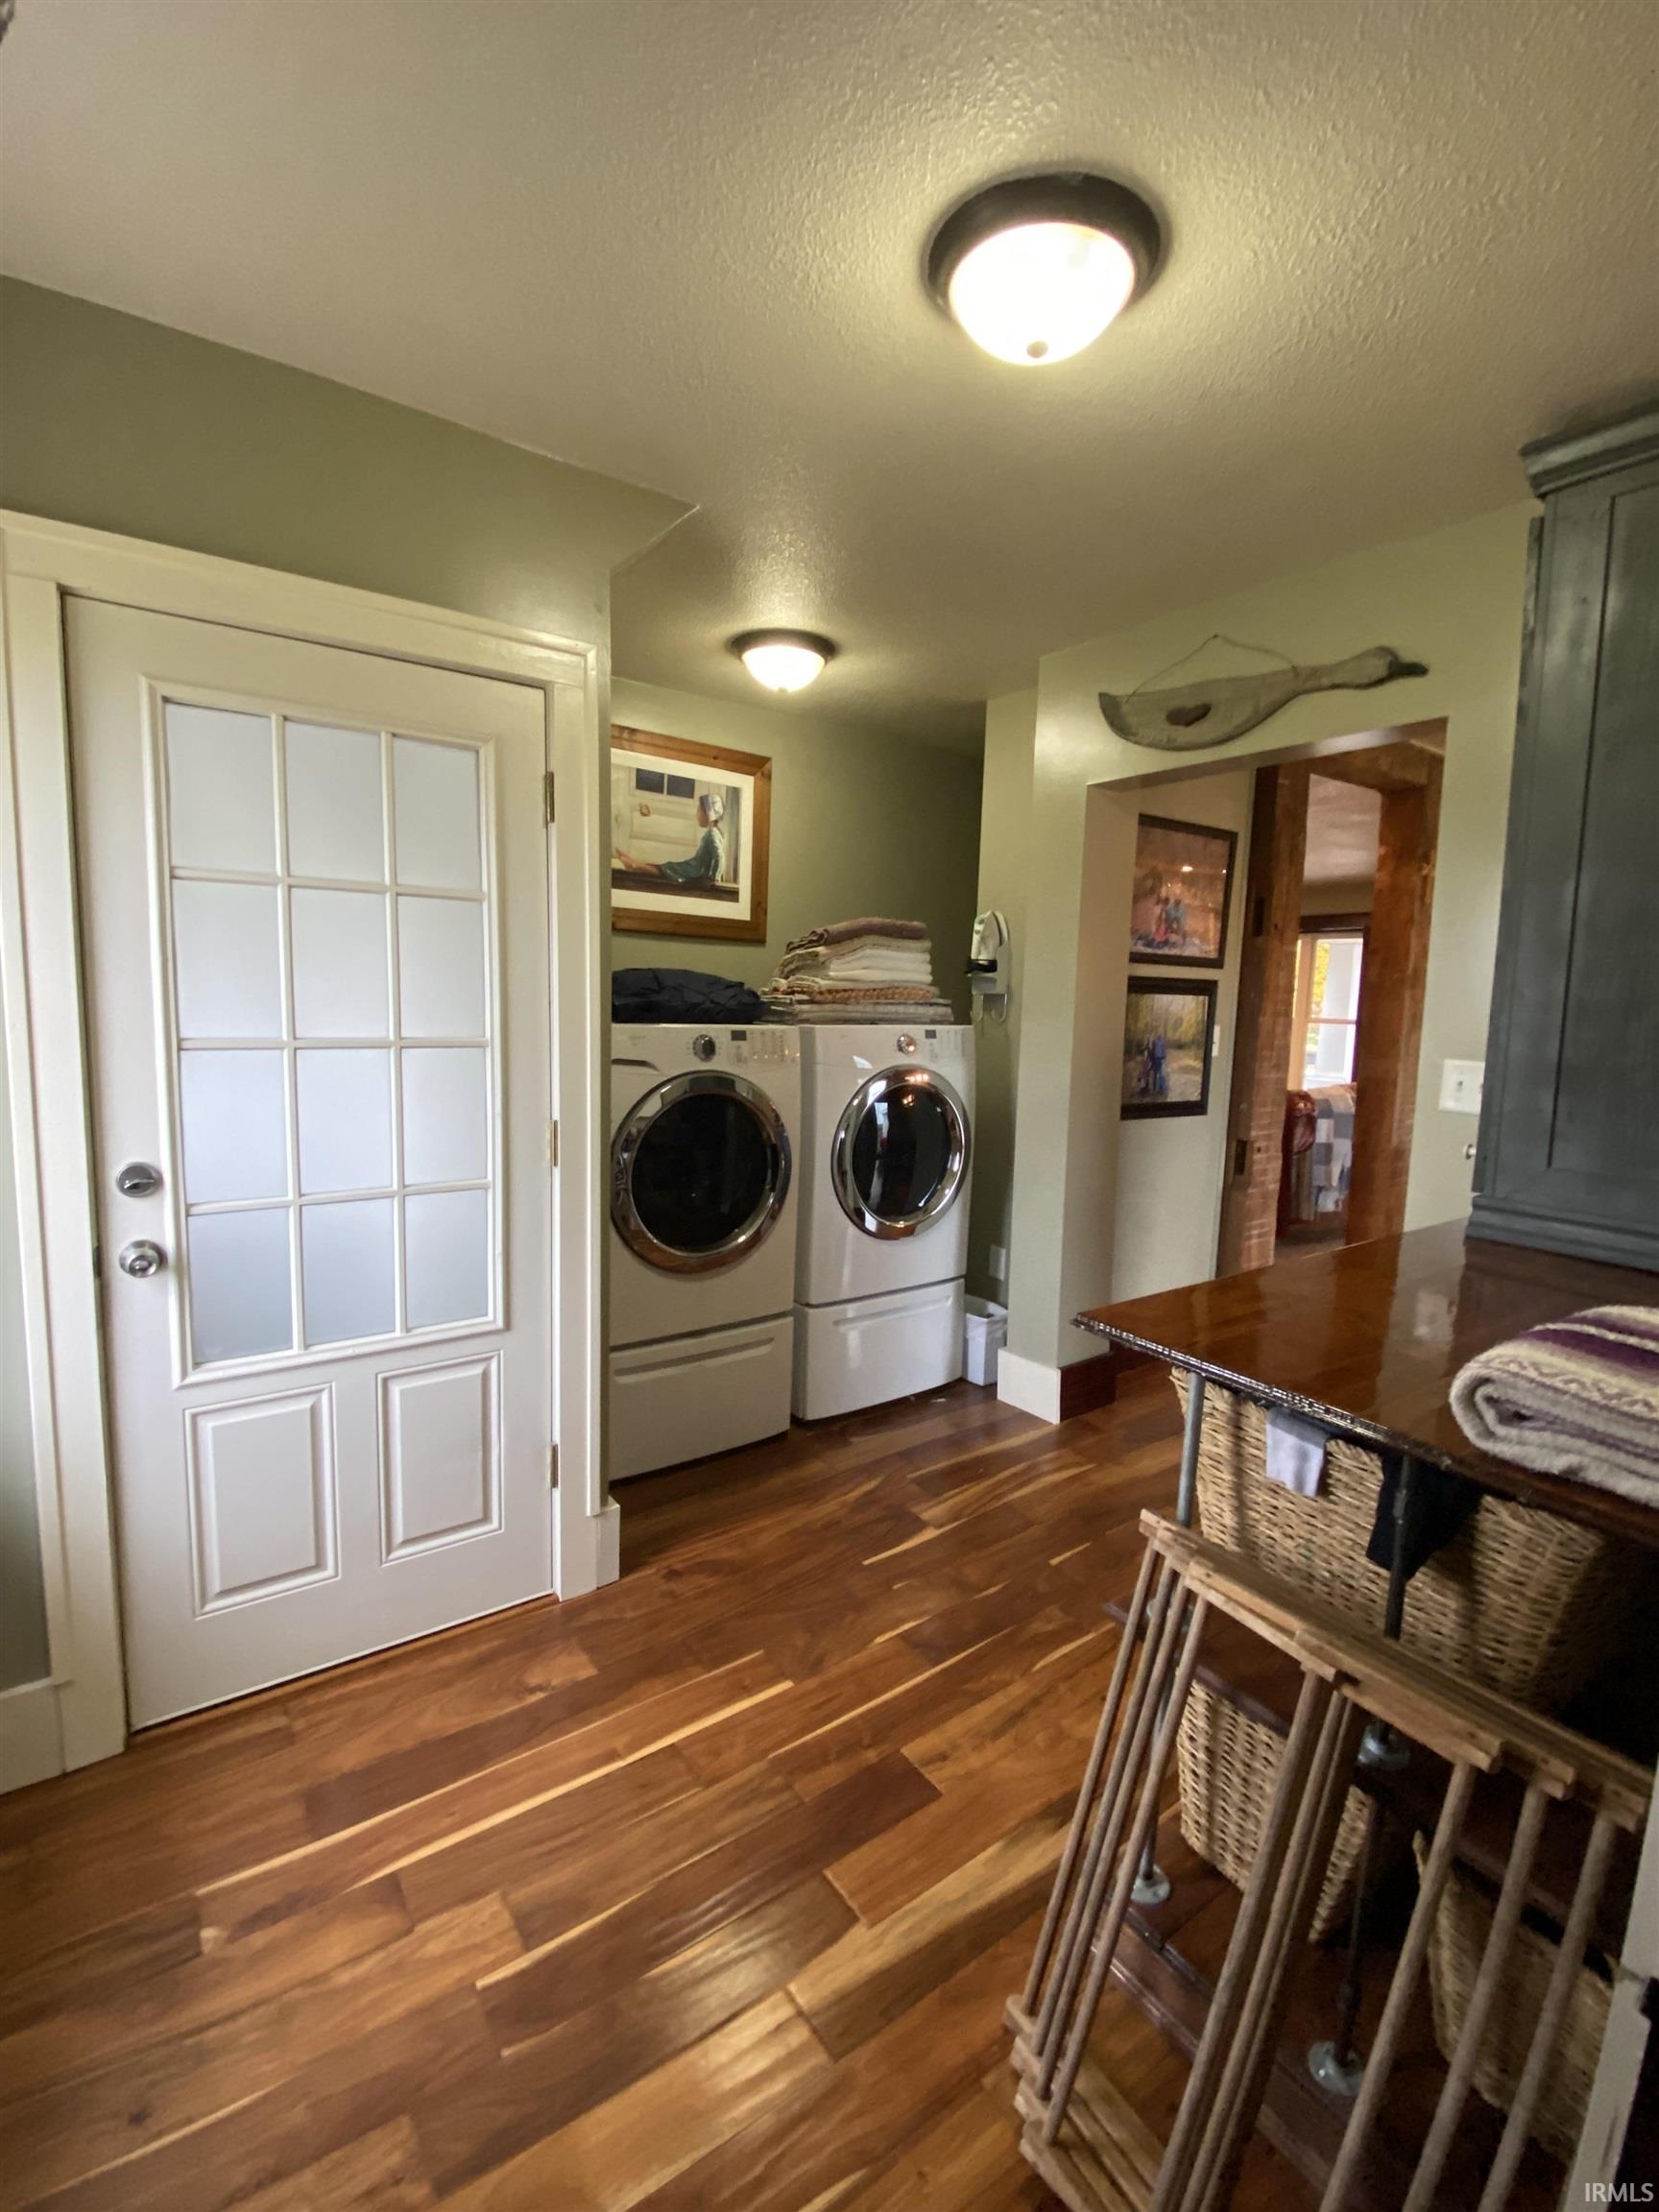 This space will make doing laundry a little easier!